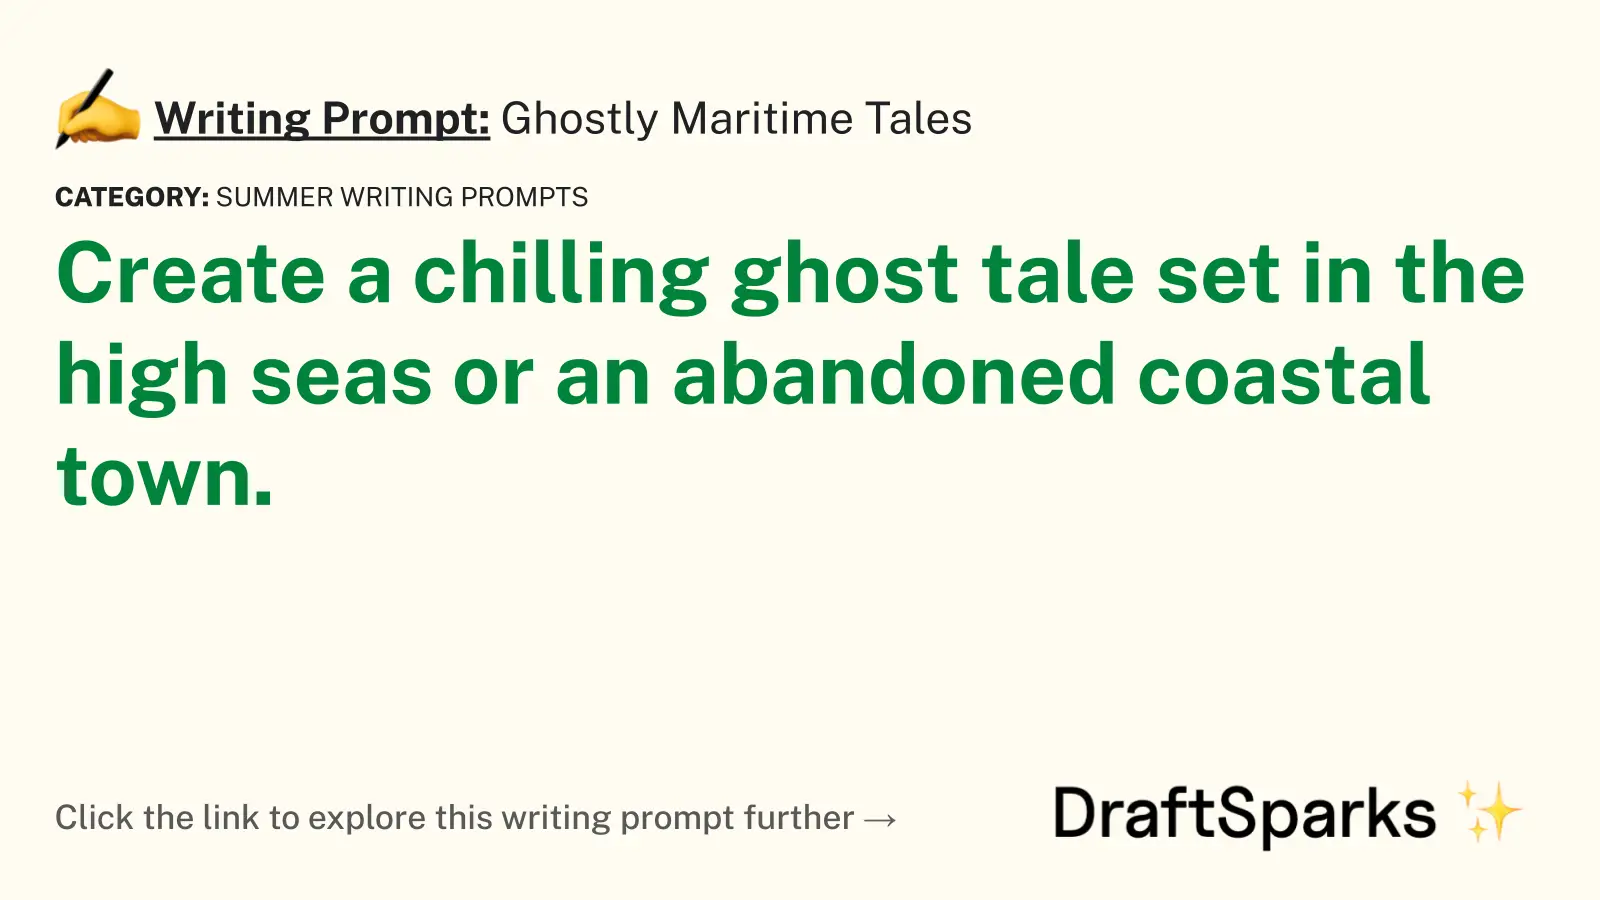 Ghostly Maritime Tales